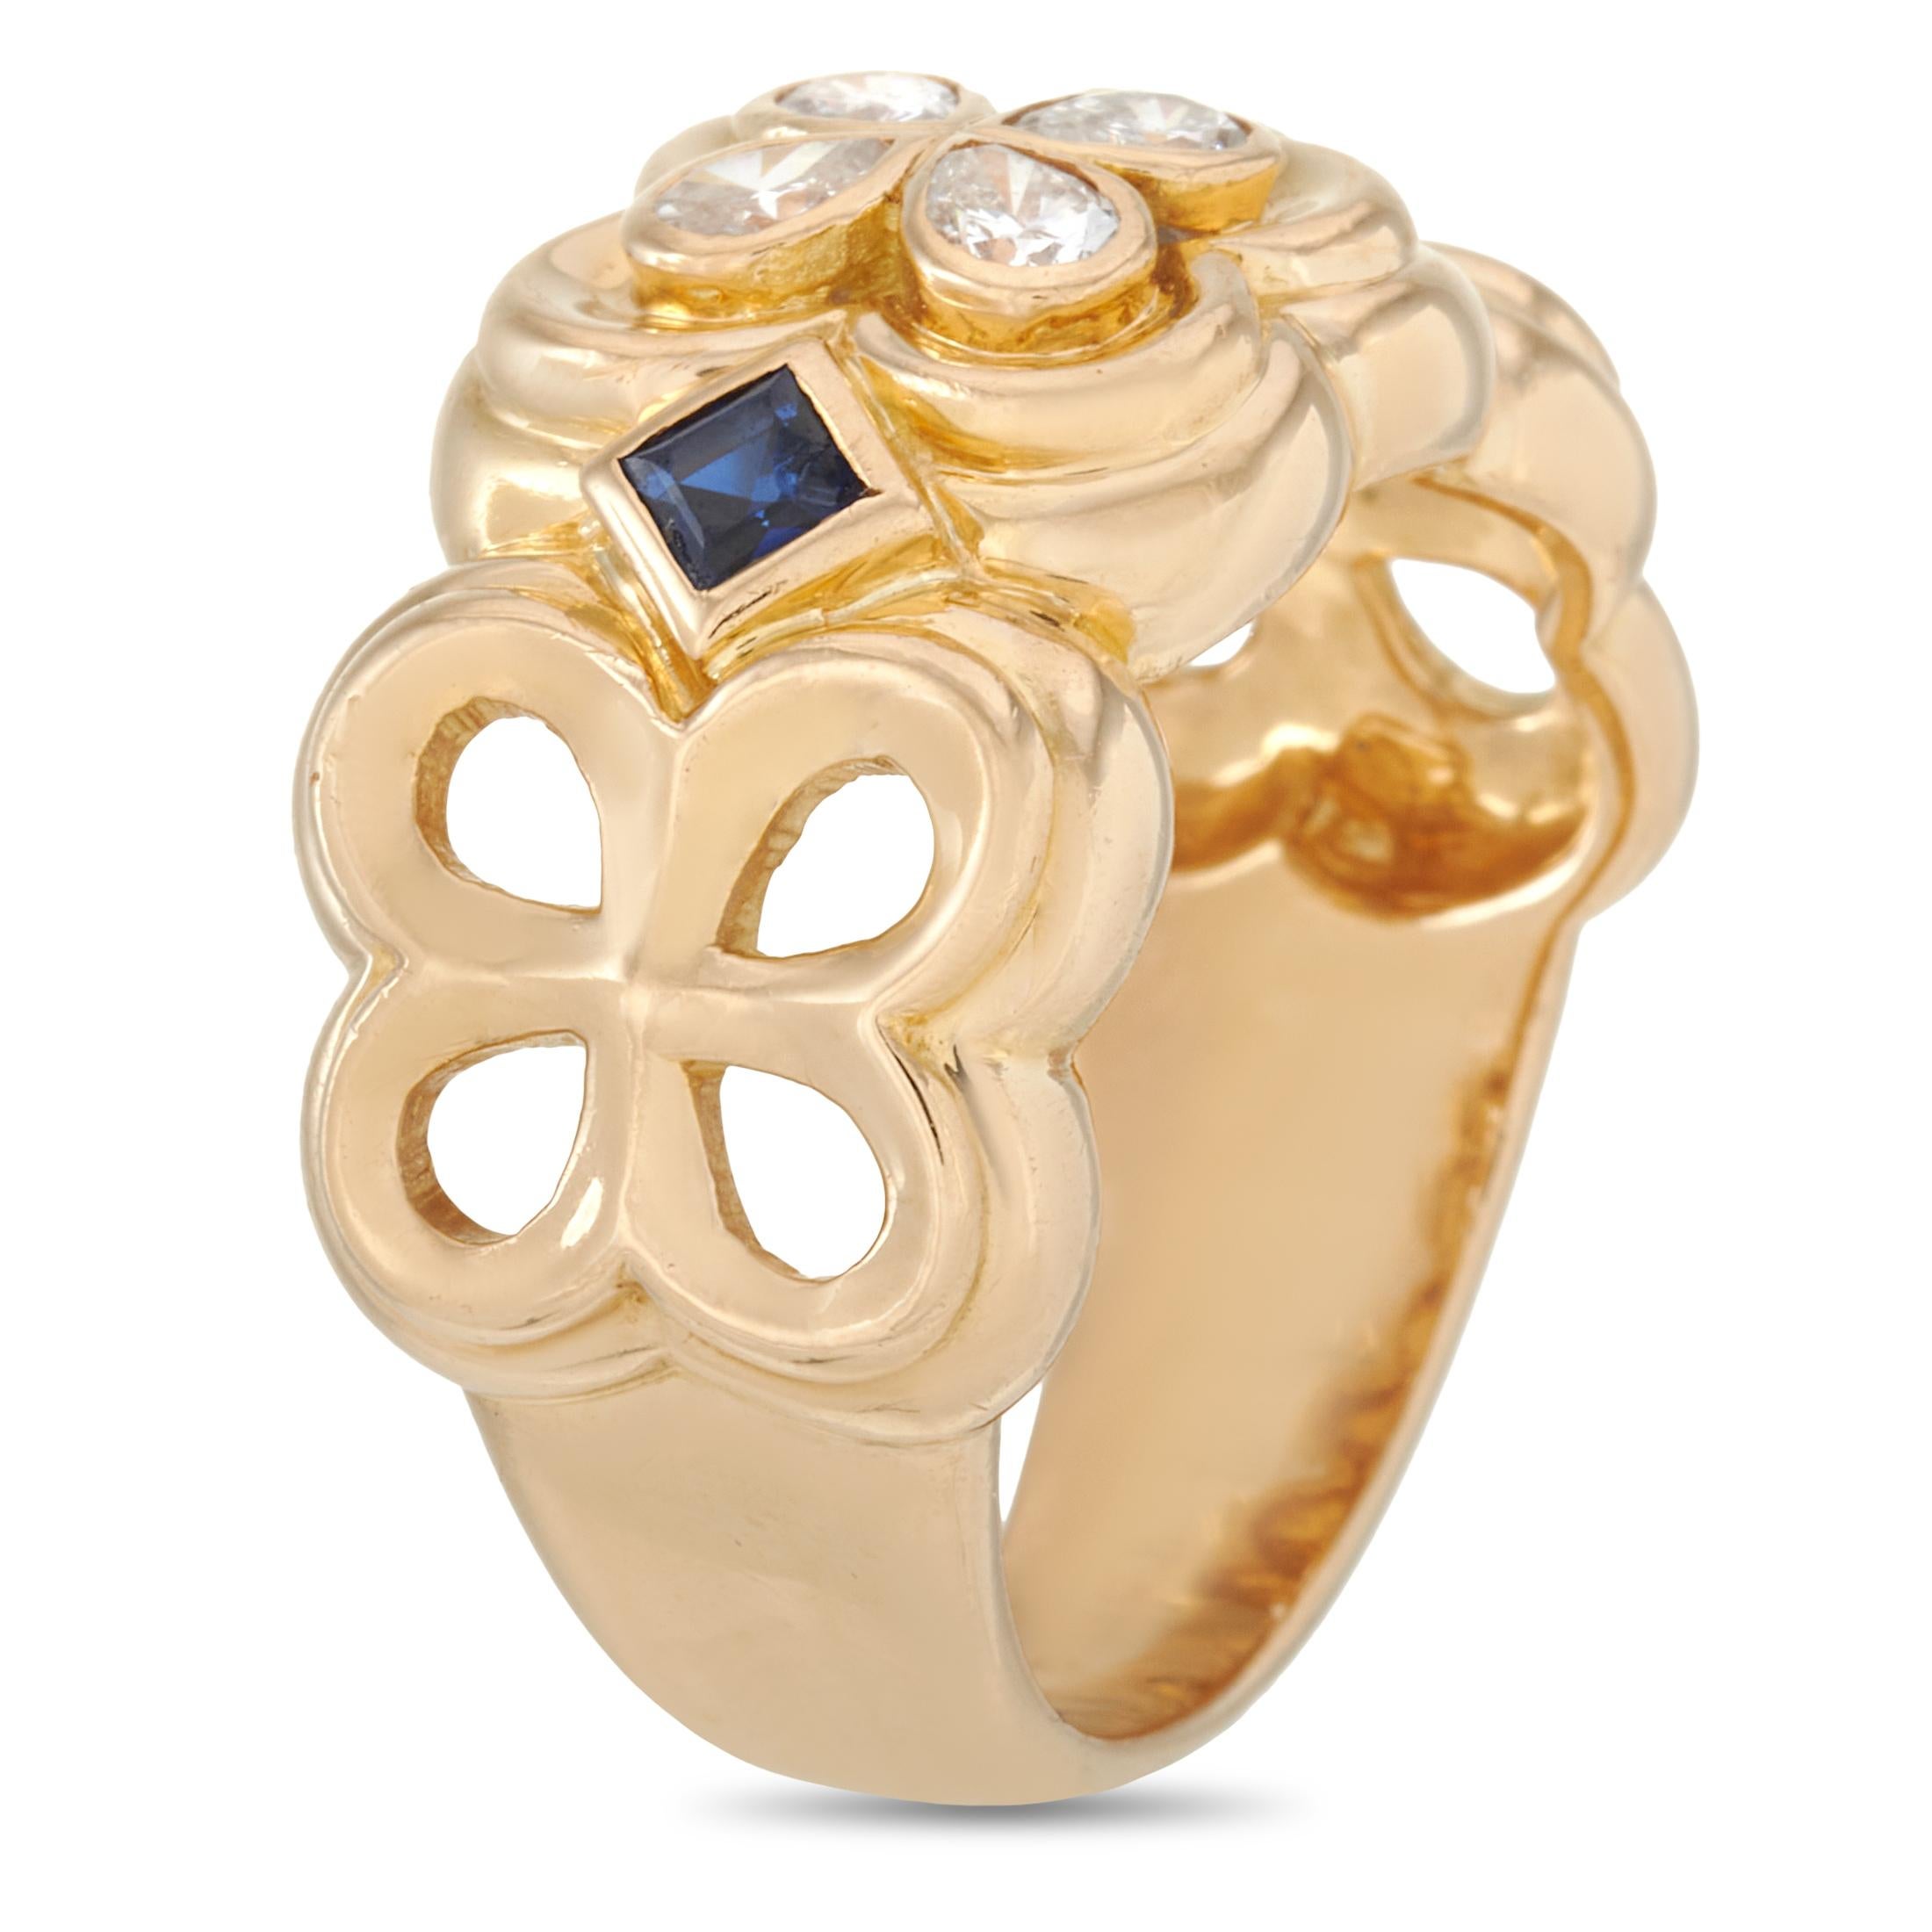 This Dior ring is crafted from 18K yellow gold and set with sapphires and a total of 0.50 carats of diamonds. The ring weighs 11.6 grams. It boasts band thickness of 5 mm and top height of 4 mm, while top dimensions measure 12 by 23 mm.
 
 The